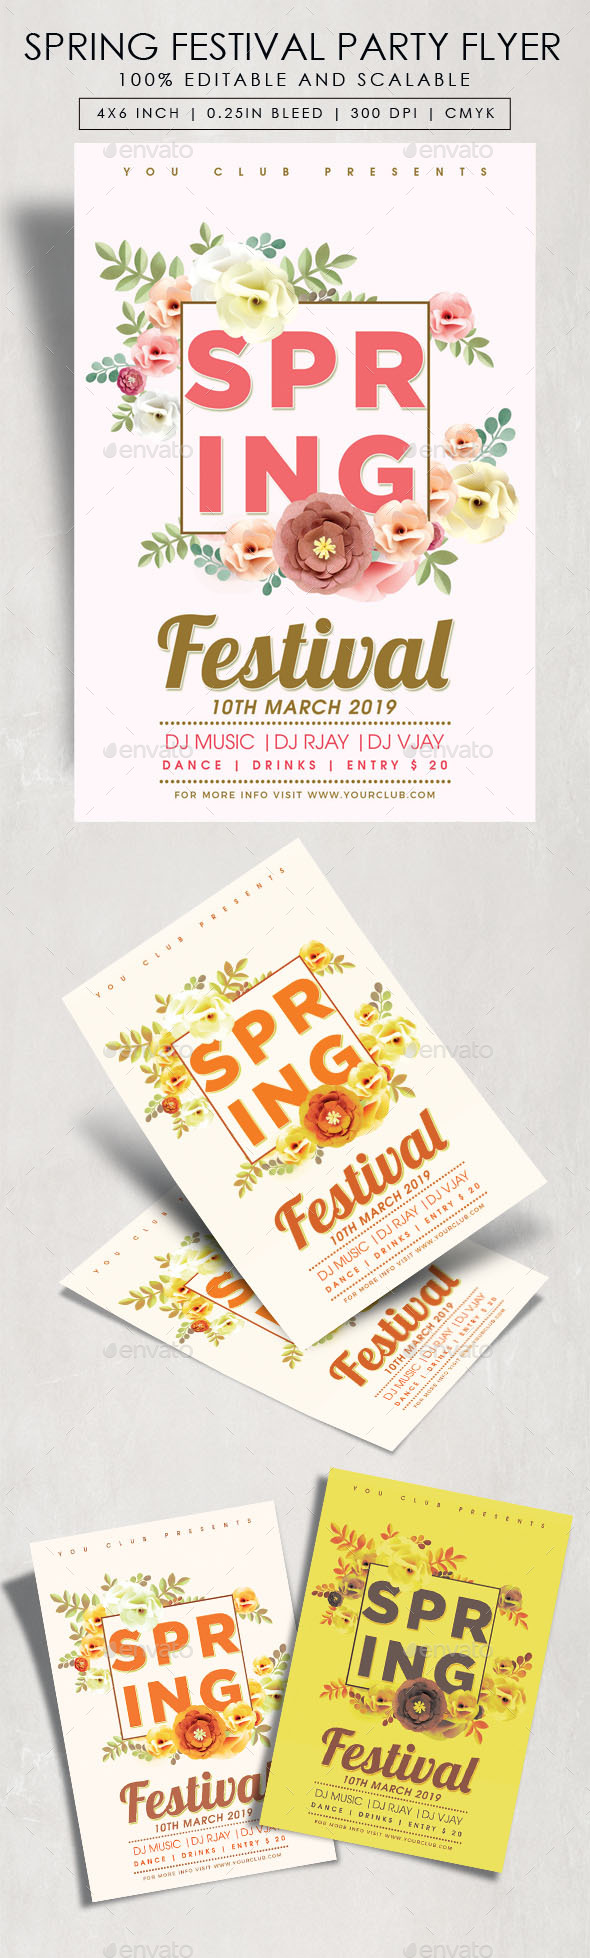 Spring Festival Party Flyer